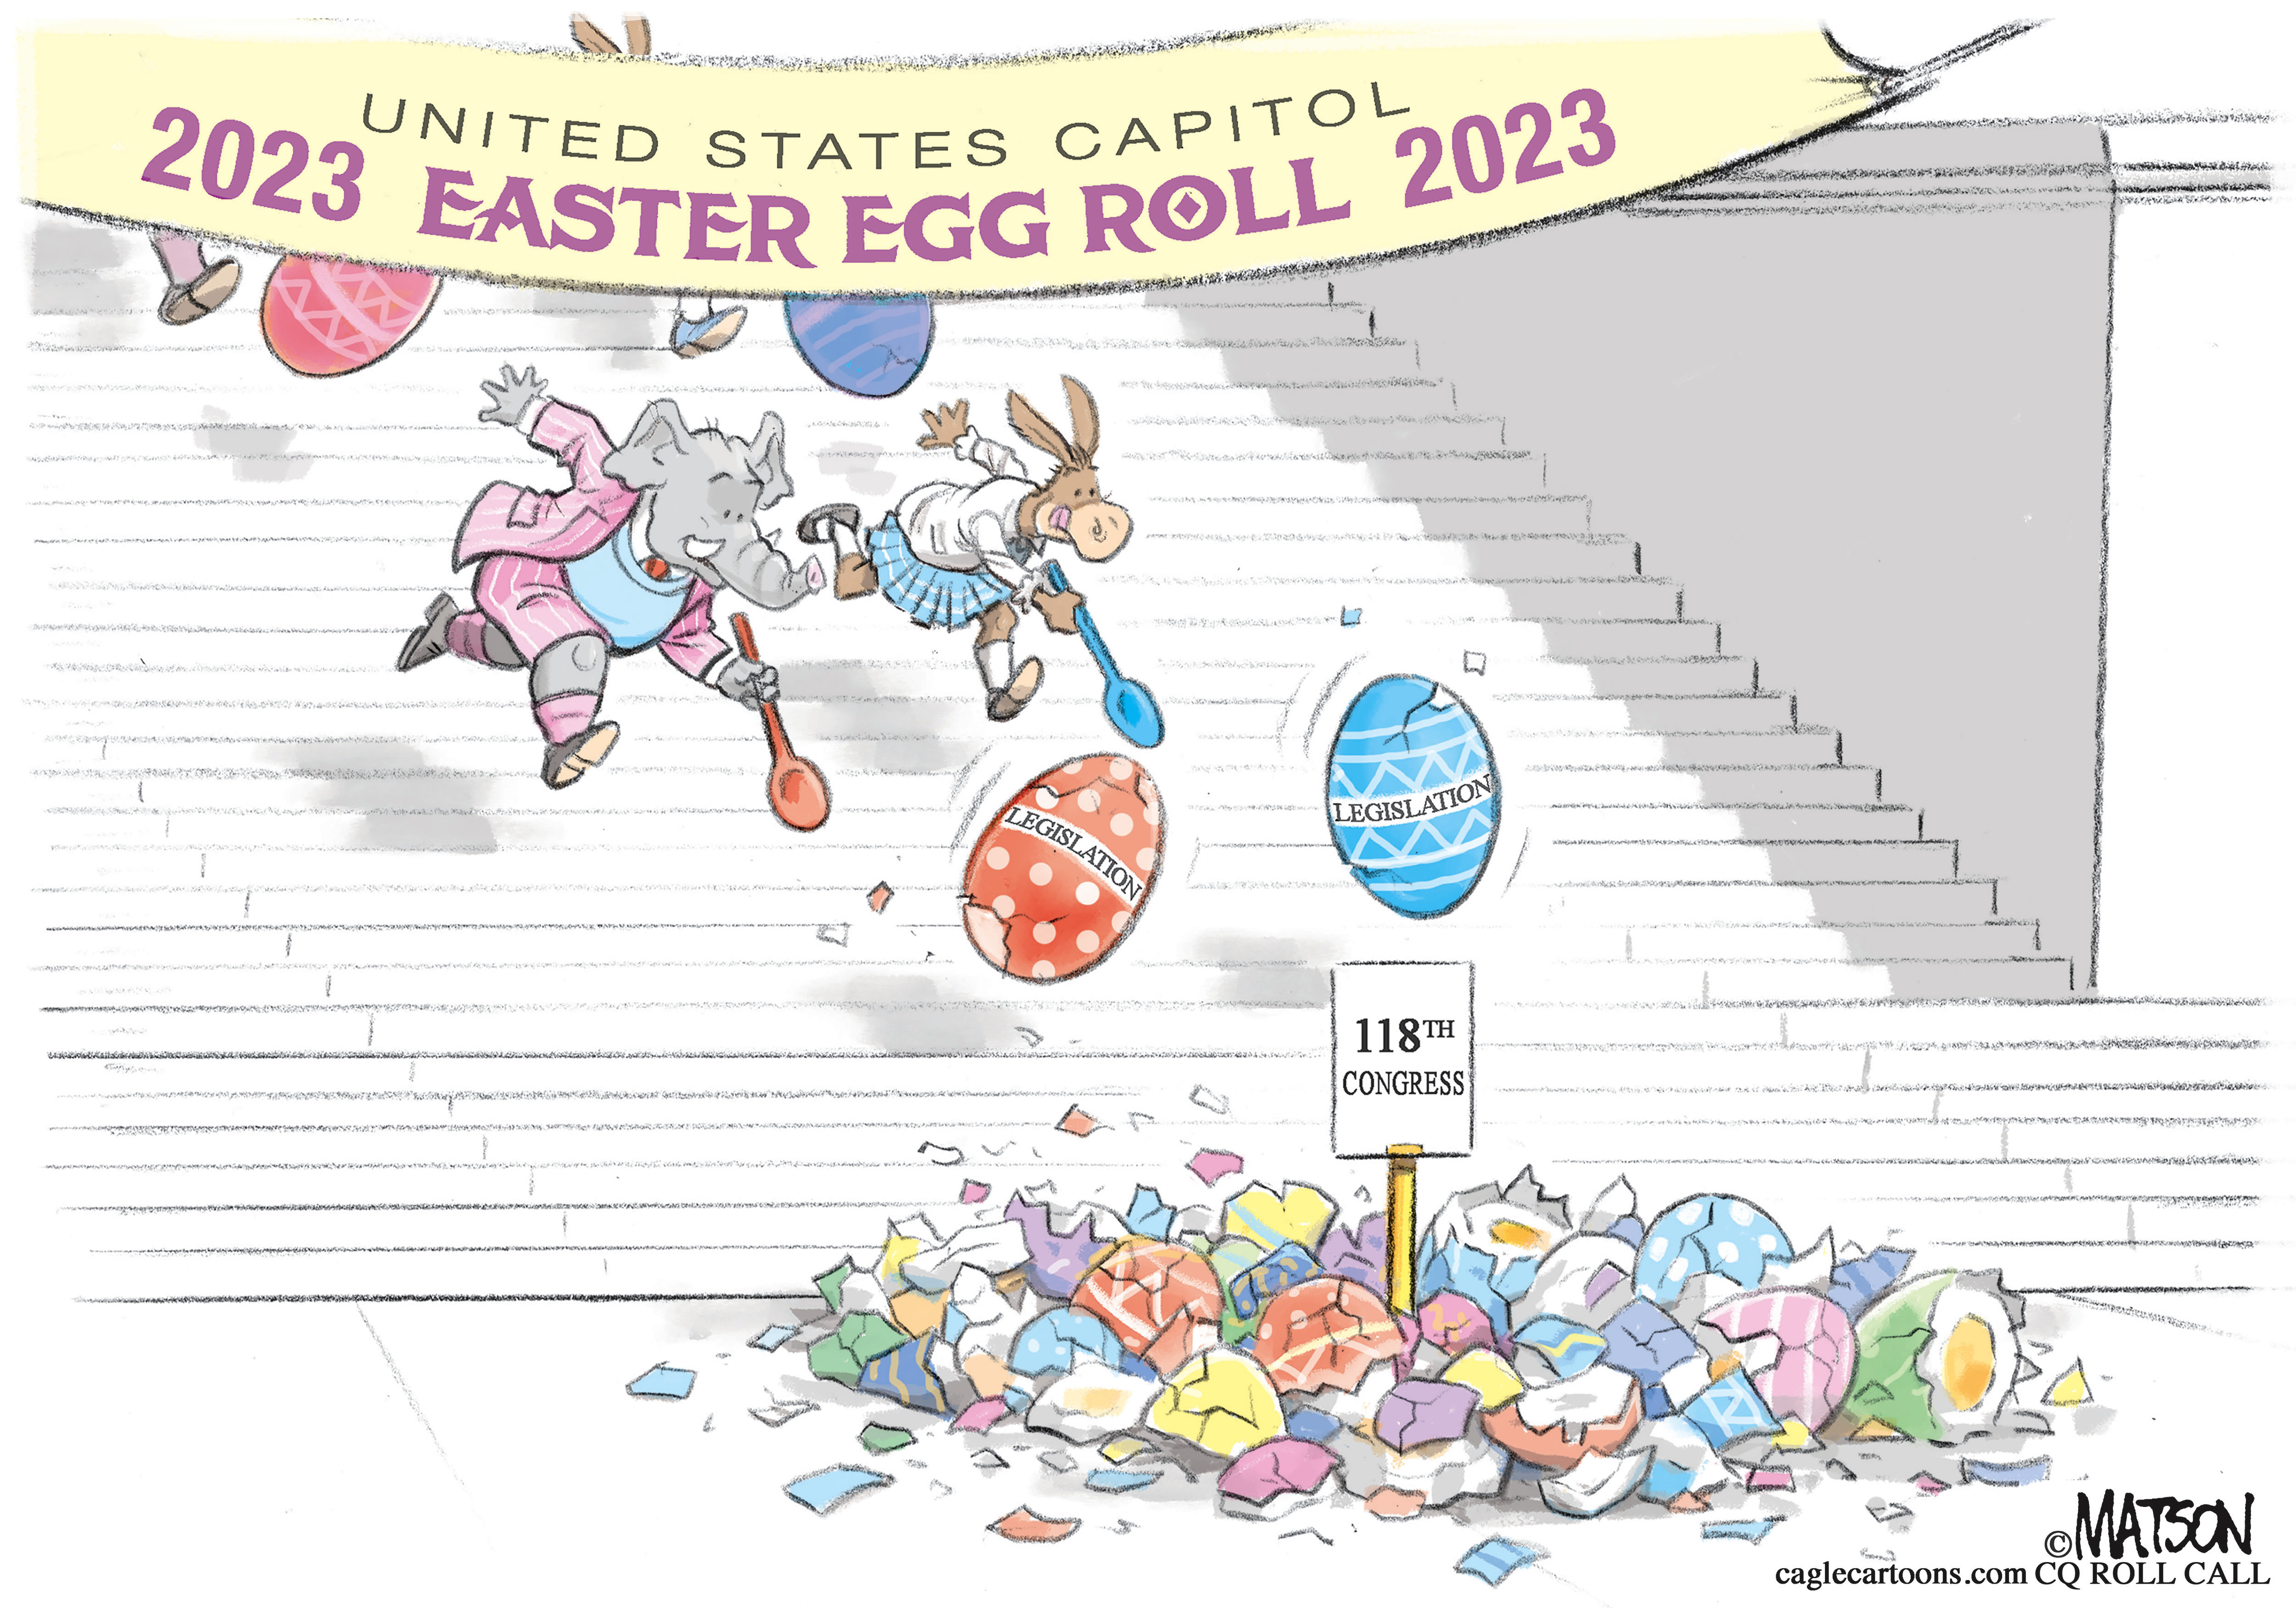 Congressional Easter egg roll